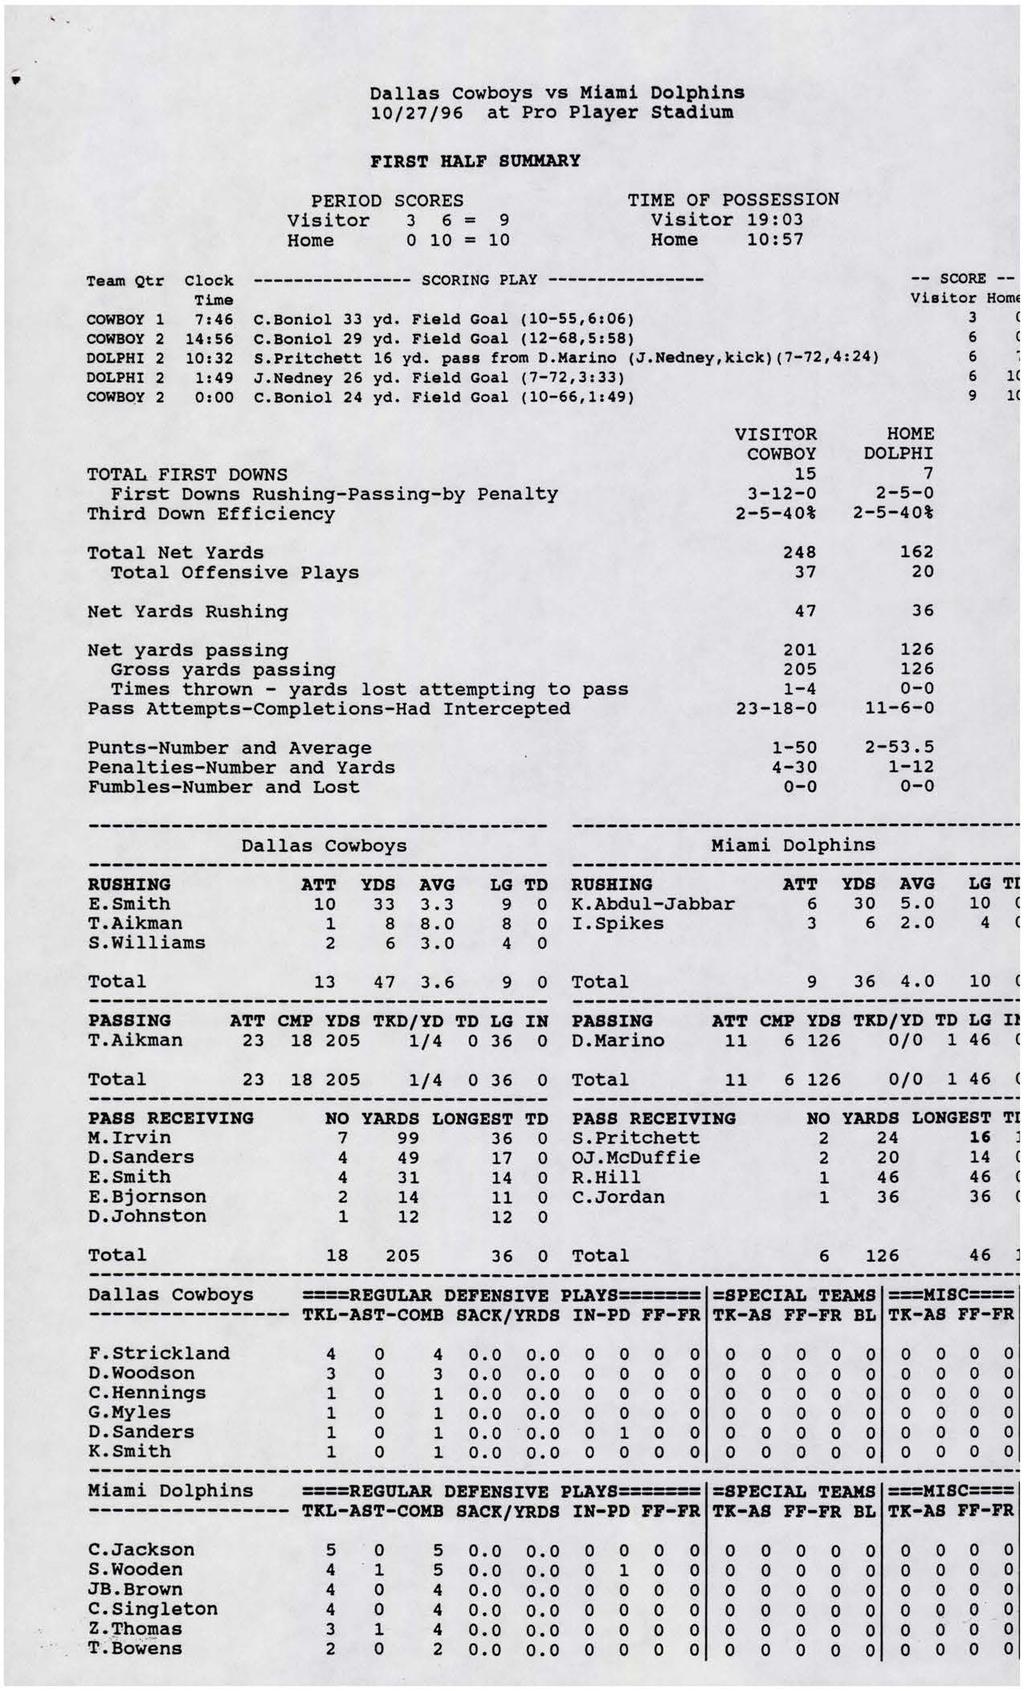 Dallas Cowboys vs Miami Dolphins 10/27/96 at Pro Player Stadium FIRST HALF SUMMARY PERIOD SCORES TIME OF POSSESSION Visitor 3 6 9 Visitor 19:03 Home 0 10 10 Home 10:57 Team Qtr Clock SCORING PLAY --